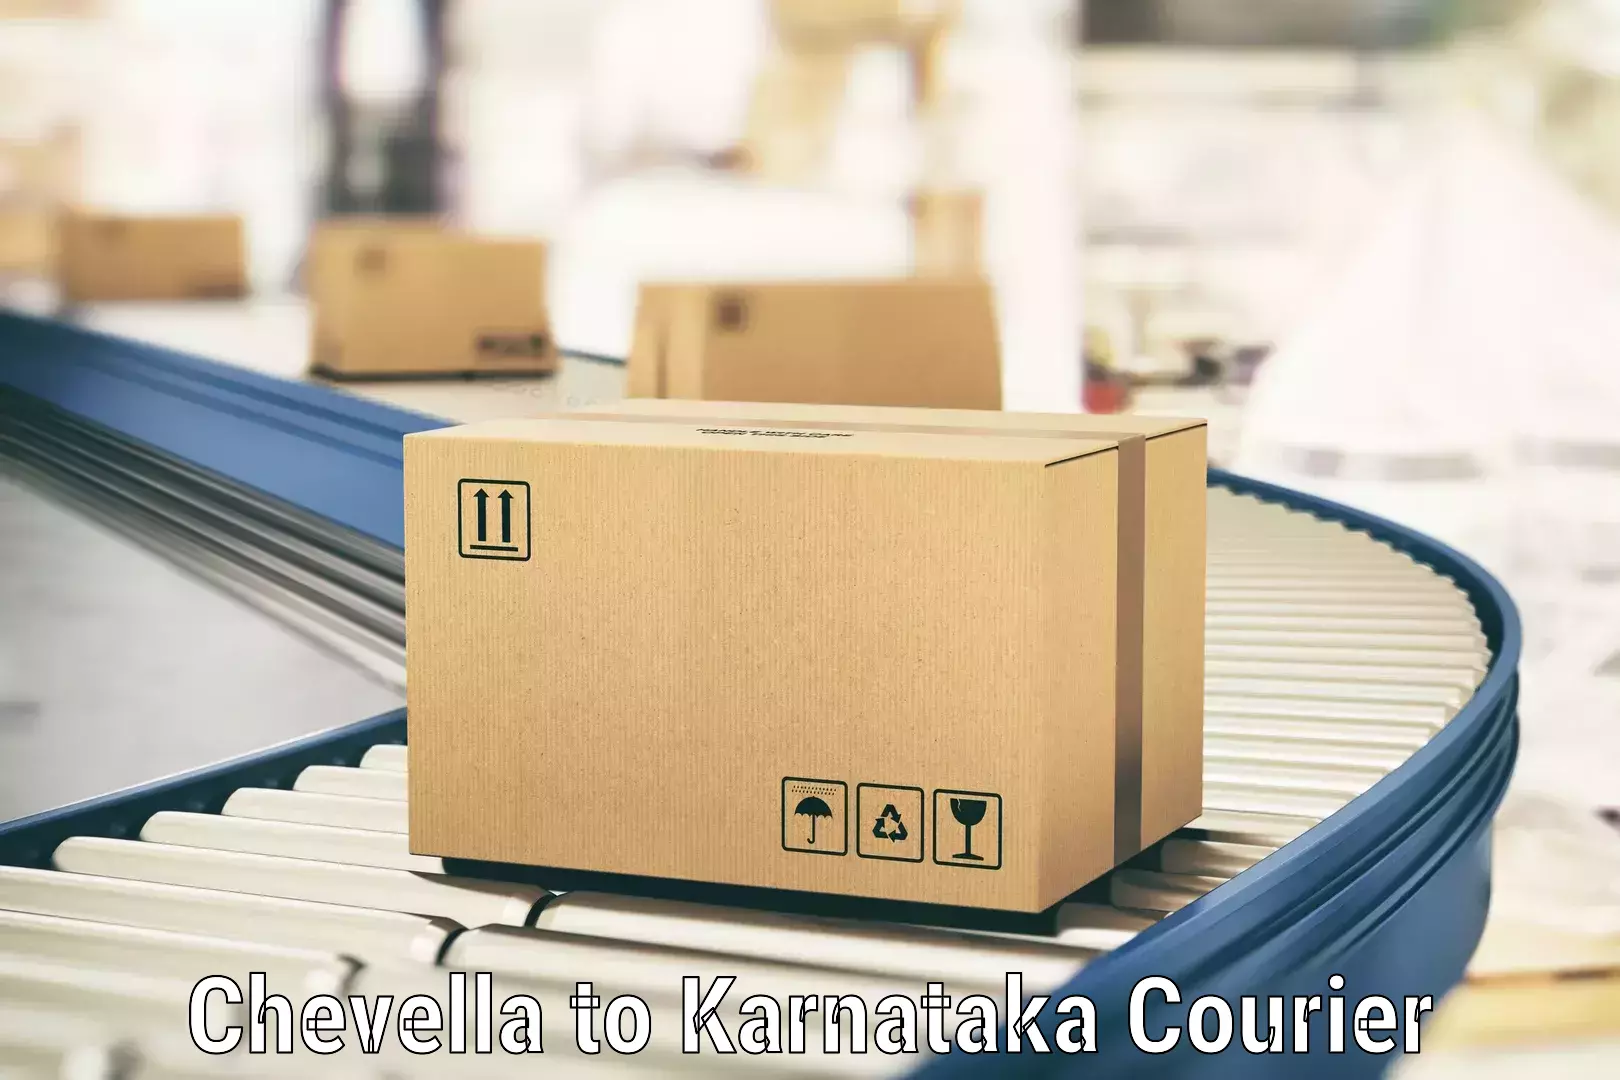 On-time delivery services in Chevella to Kalasa